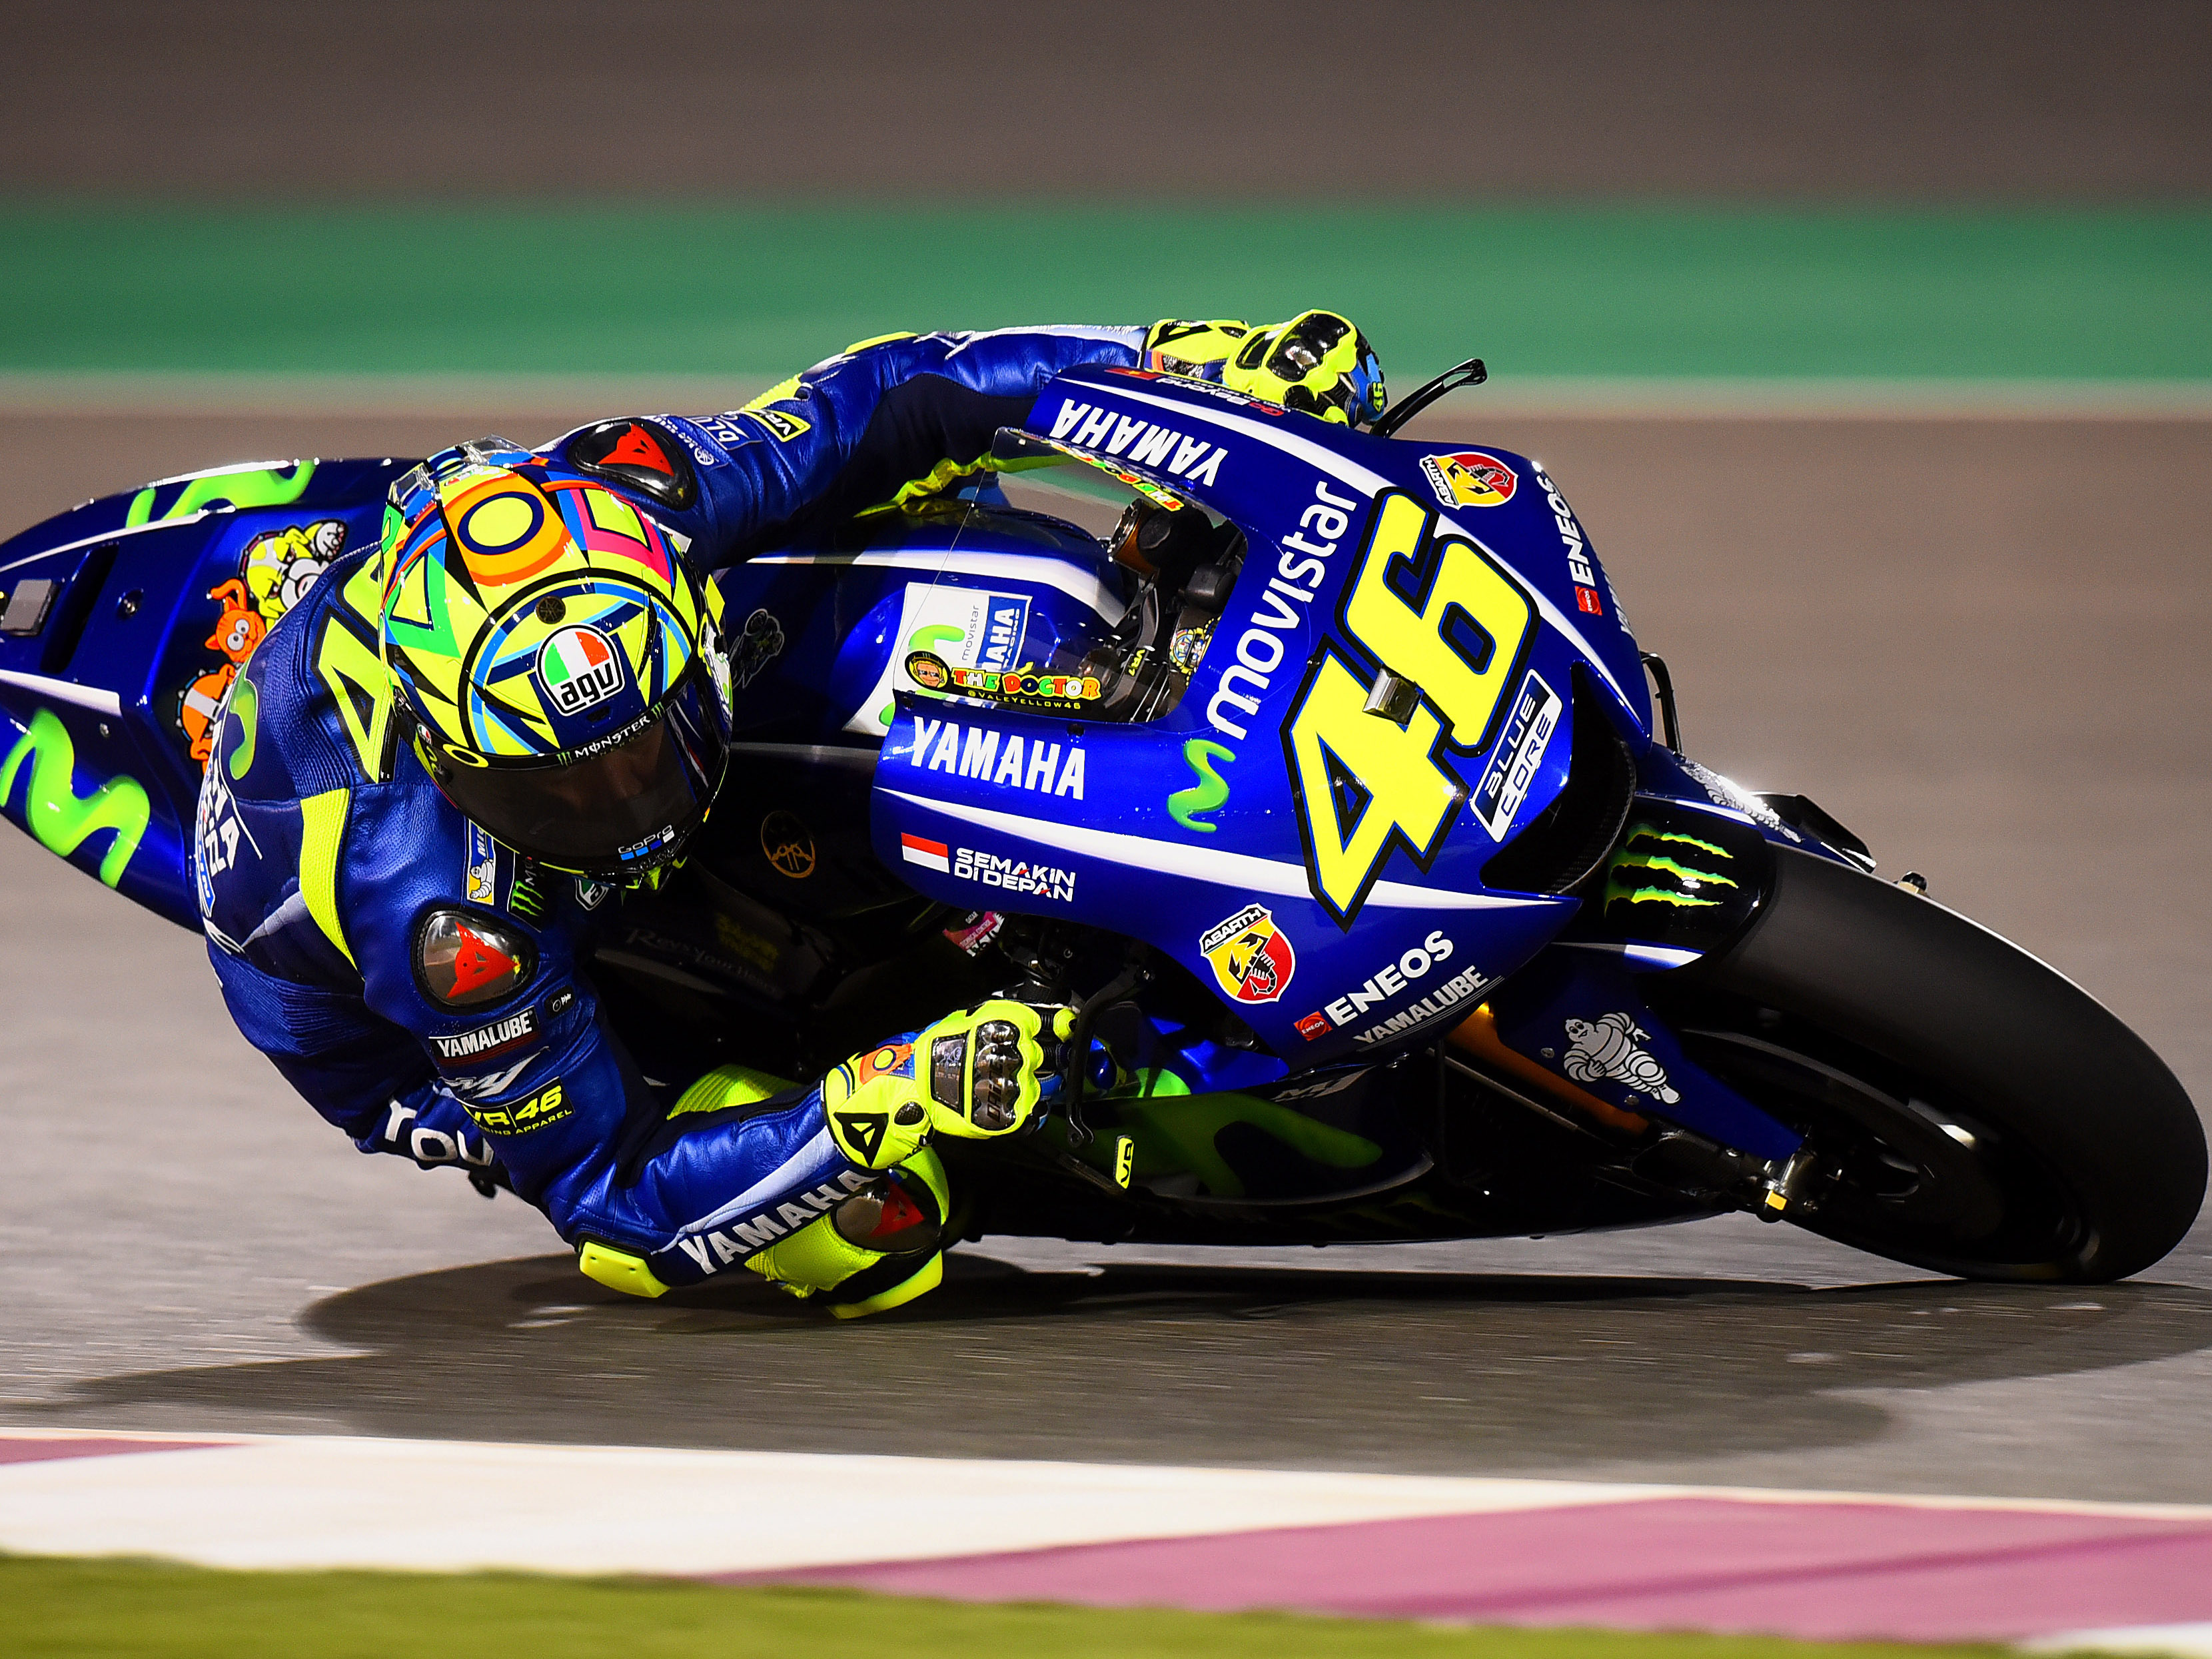 MotoGP: The back story of Valentino Rossi's crisis | Cycle World